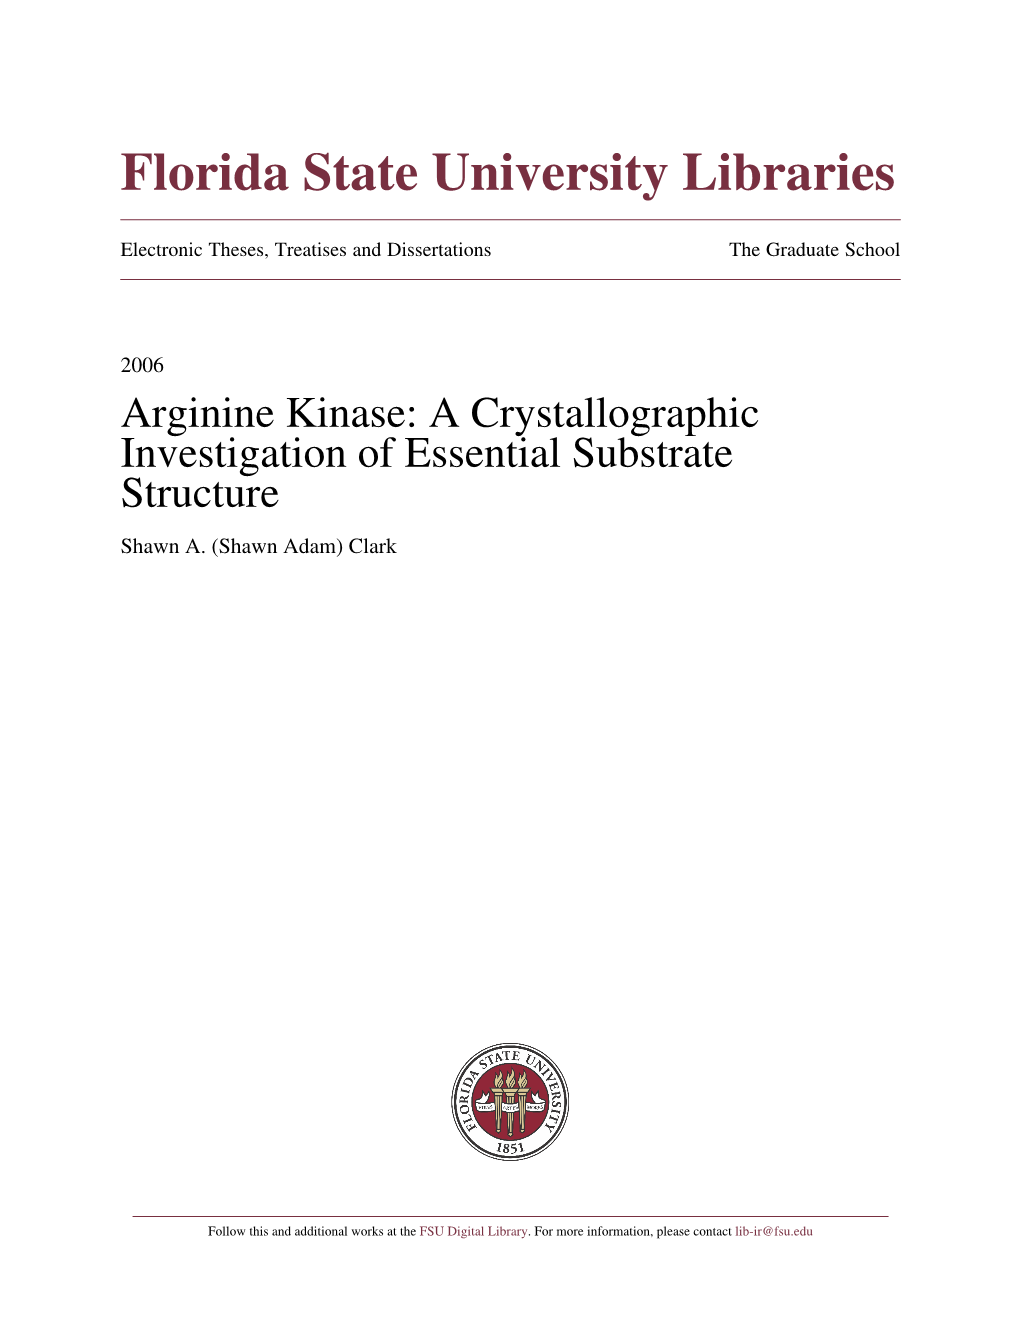 Arginine Kinase: a Crystallographic Investigation of Essential Substrate Structure Shawn A